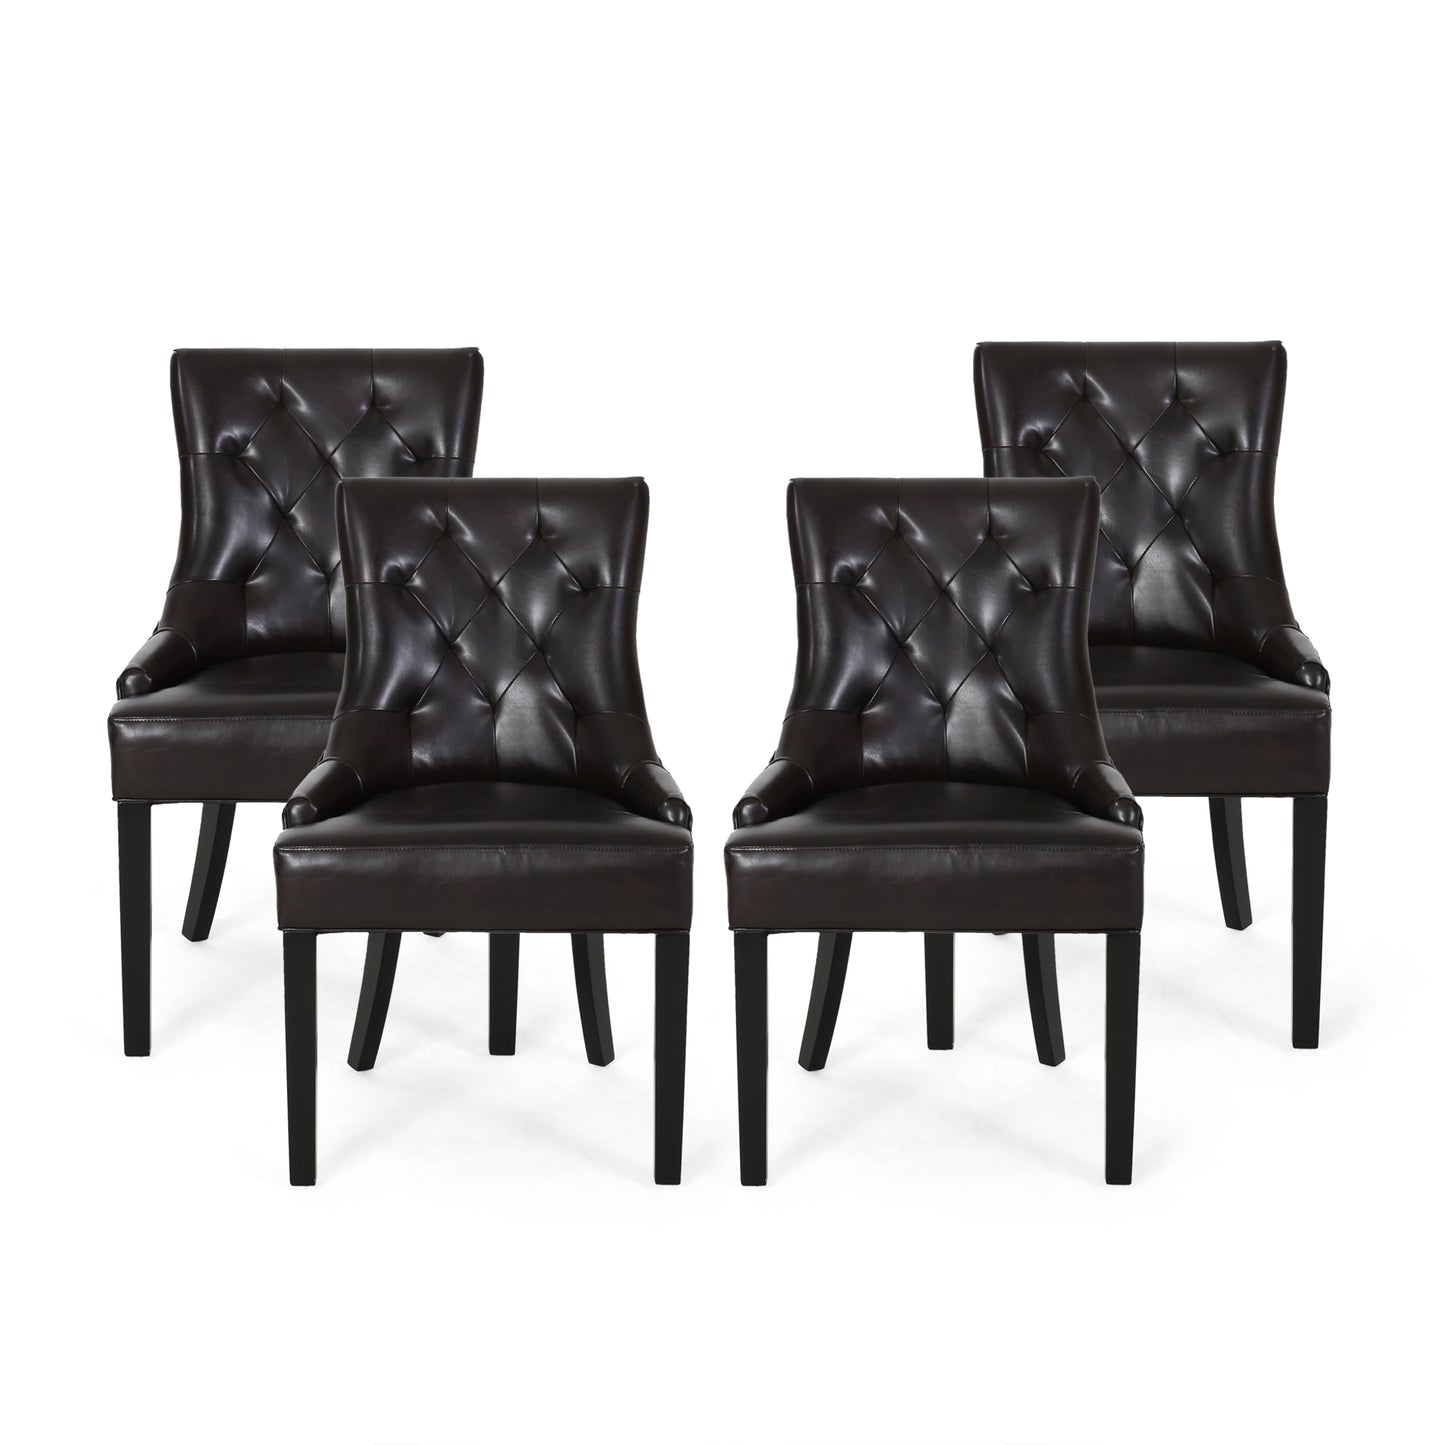 Stacy Hourglass Leather Dining Chairs (Set of 4)